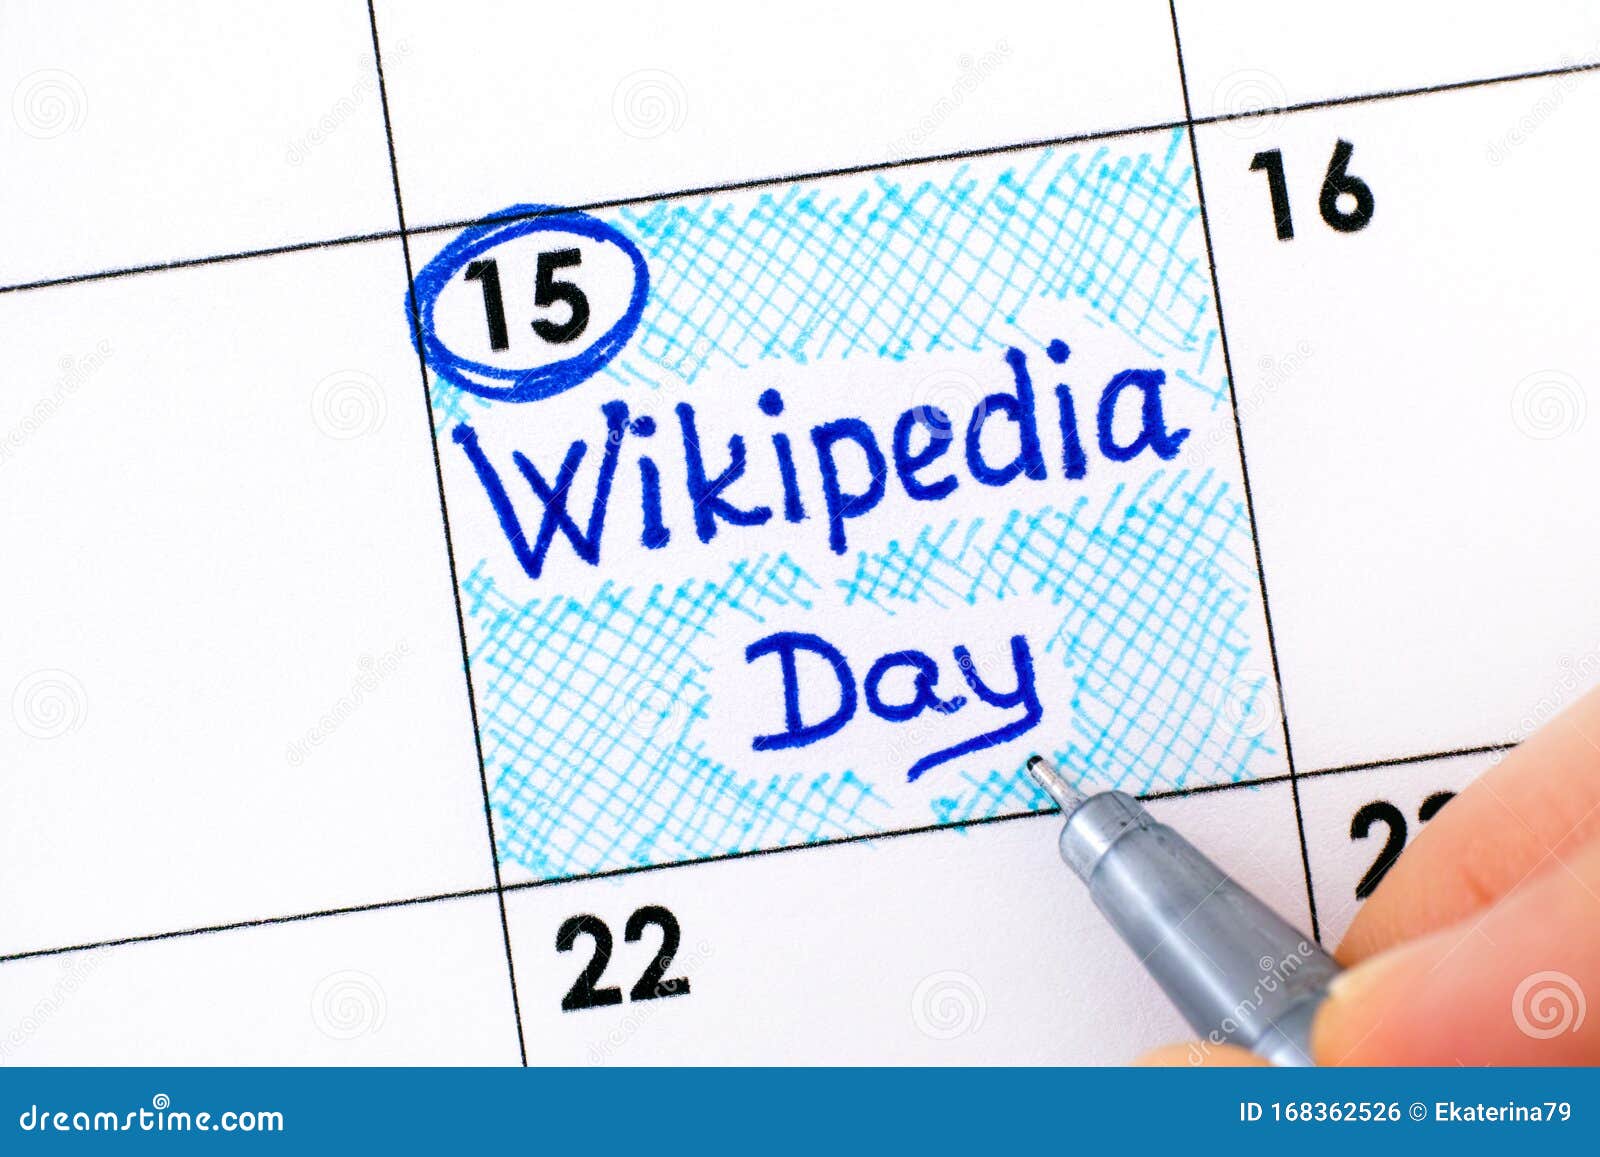 woman fingers with pen writing reminder wikipedia day in calendar